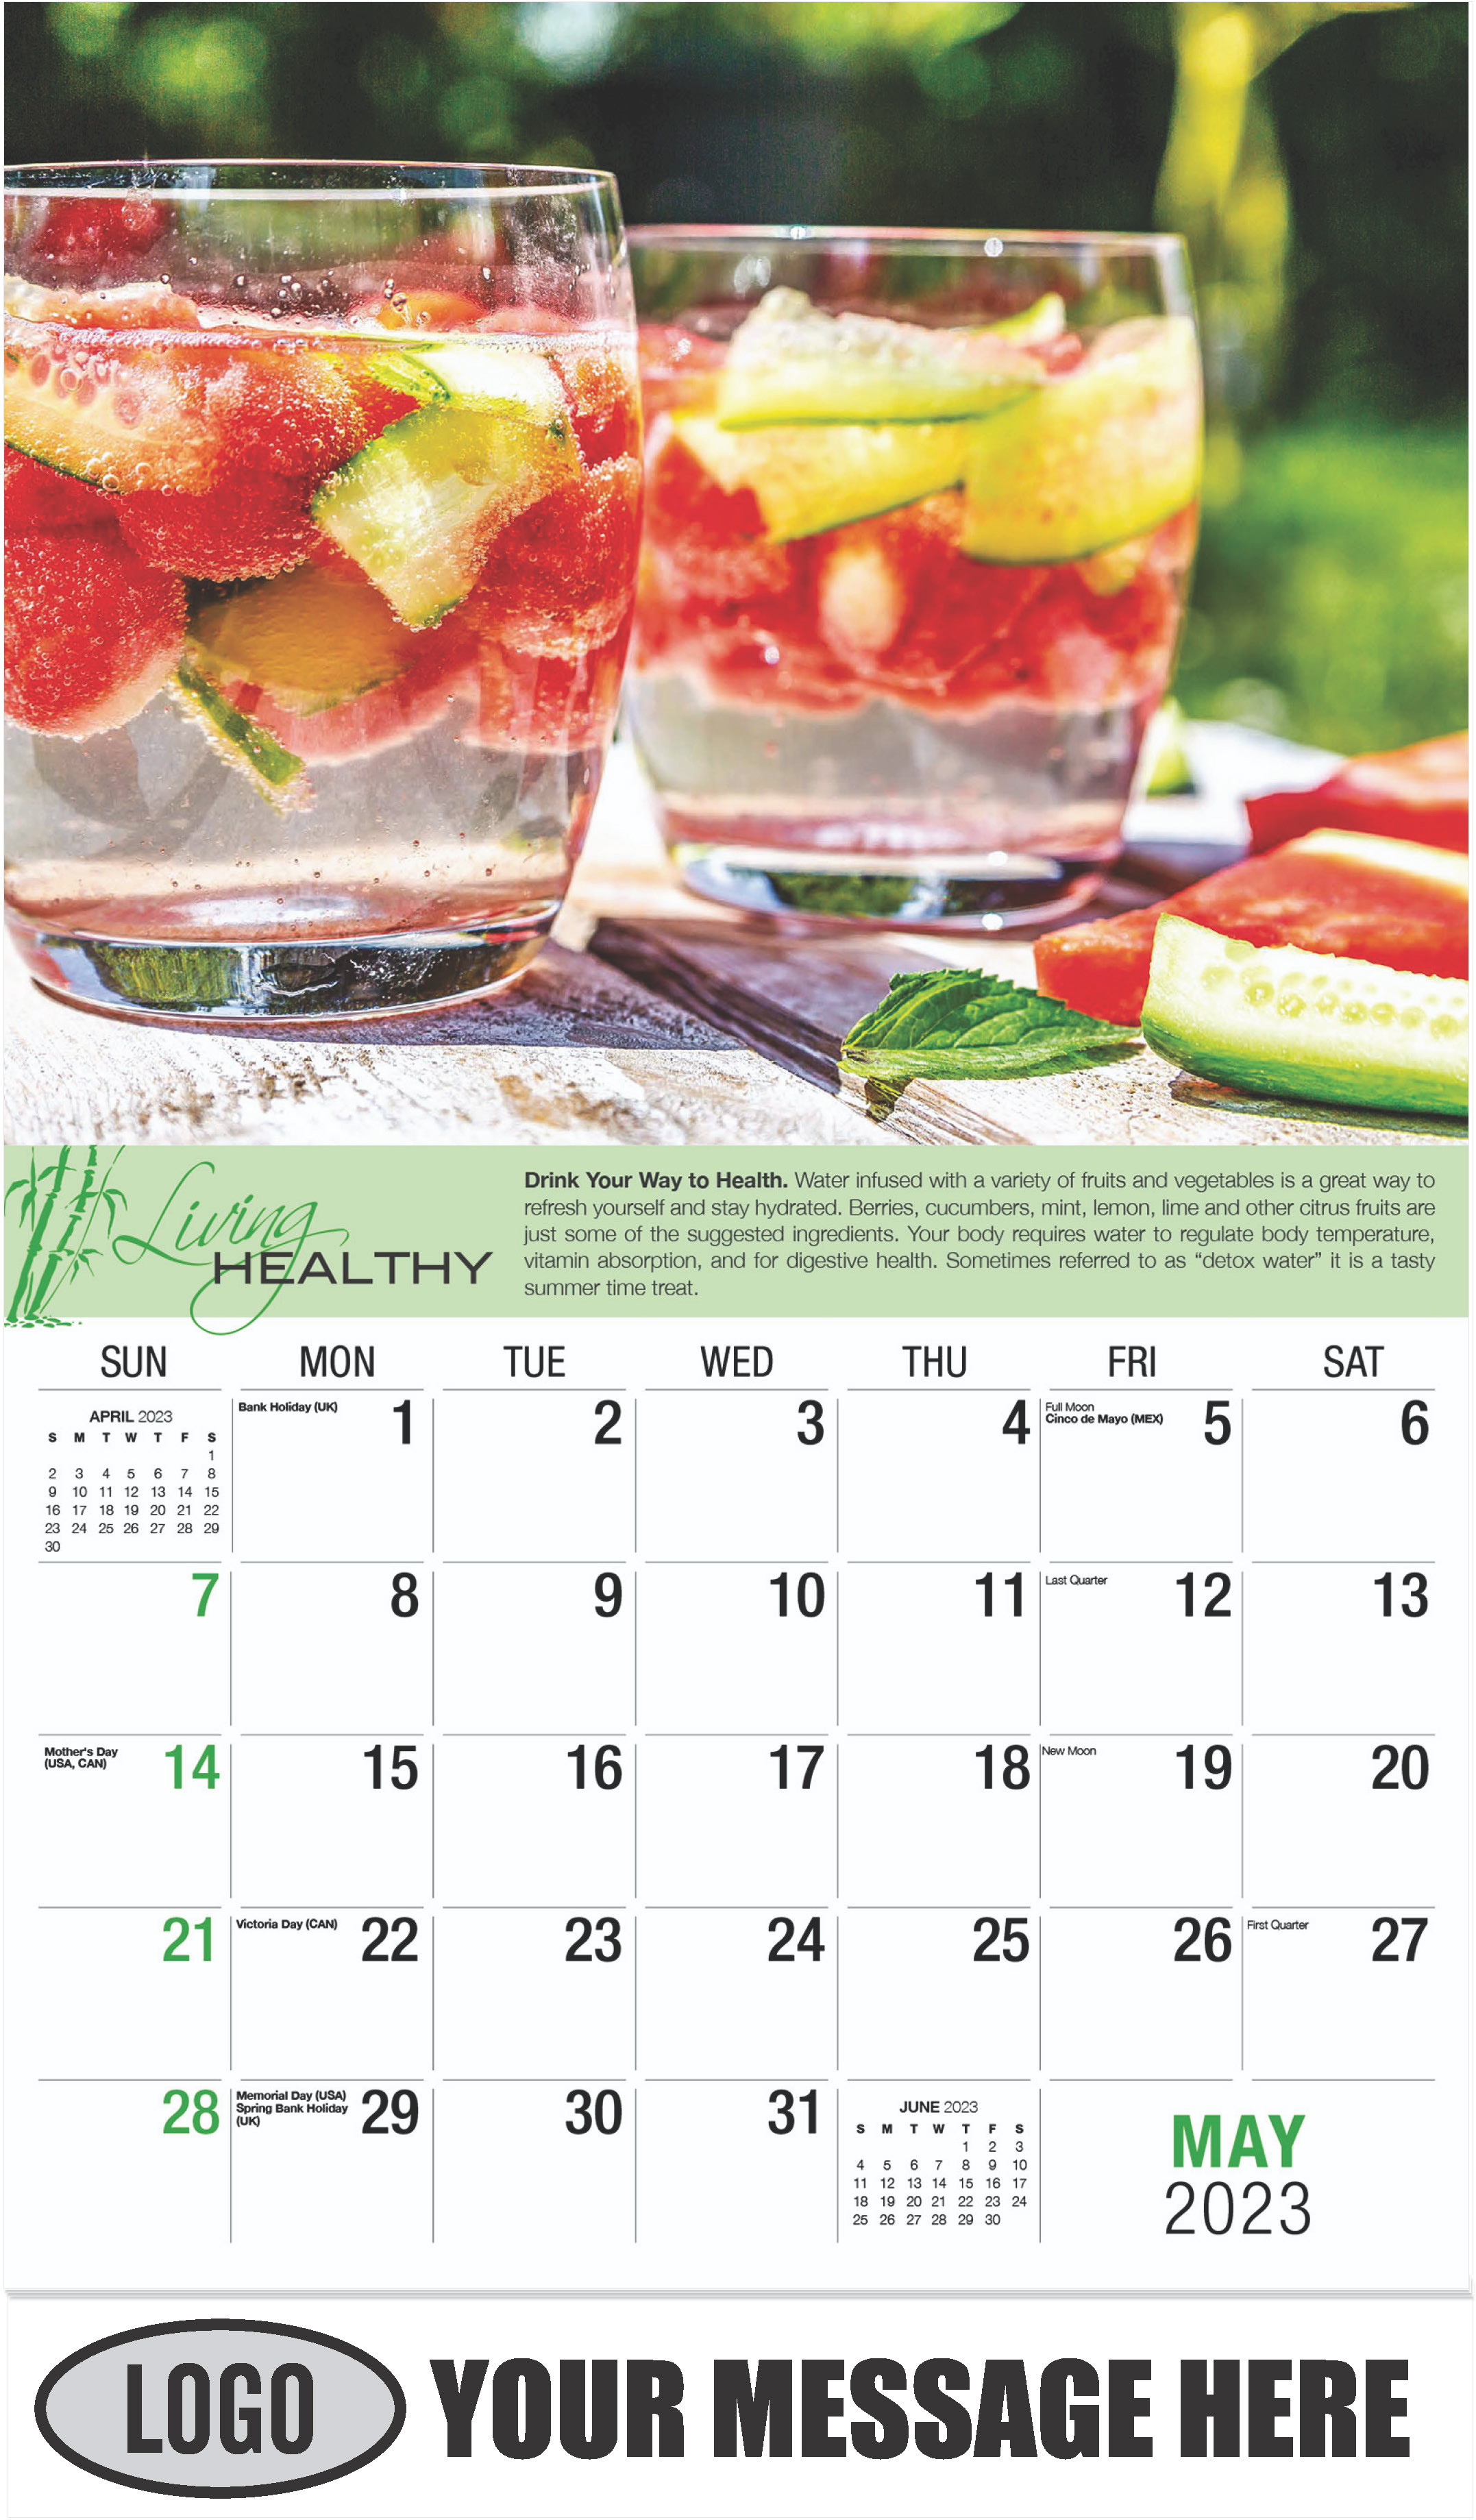 Melon Cucumber Water - May - Living Healthy 2023 Promotional Calendar